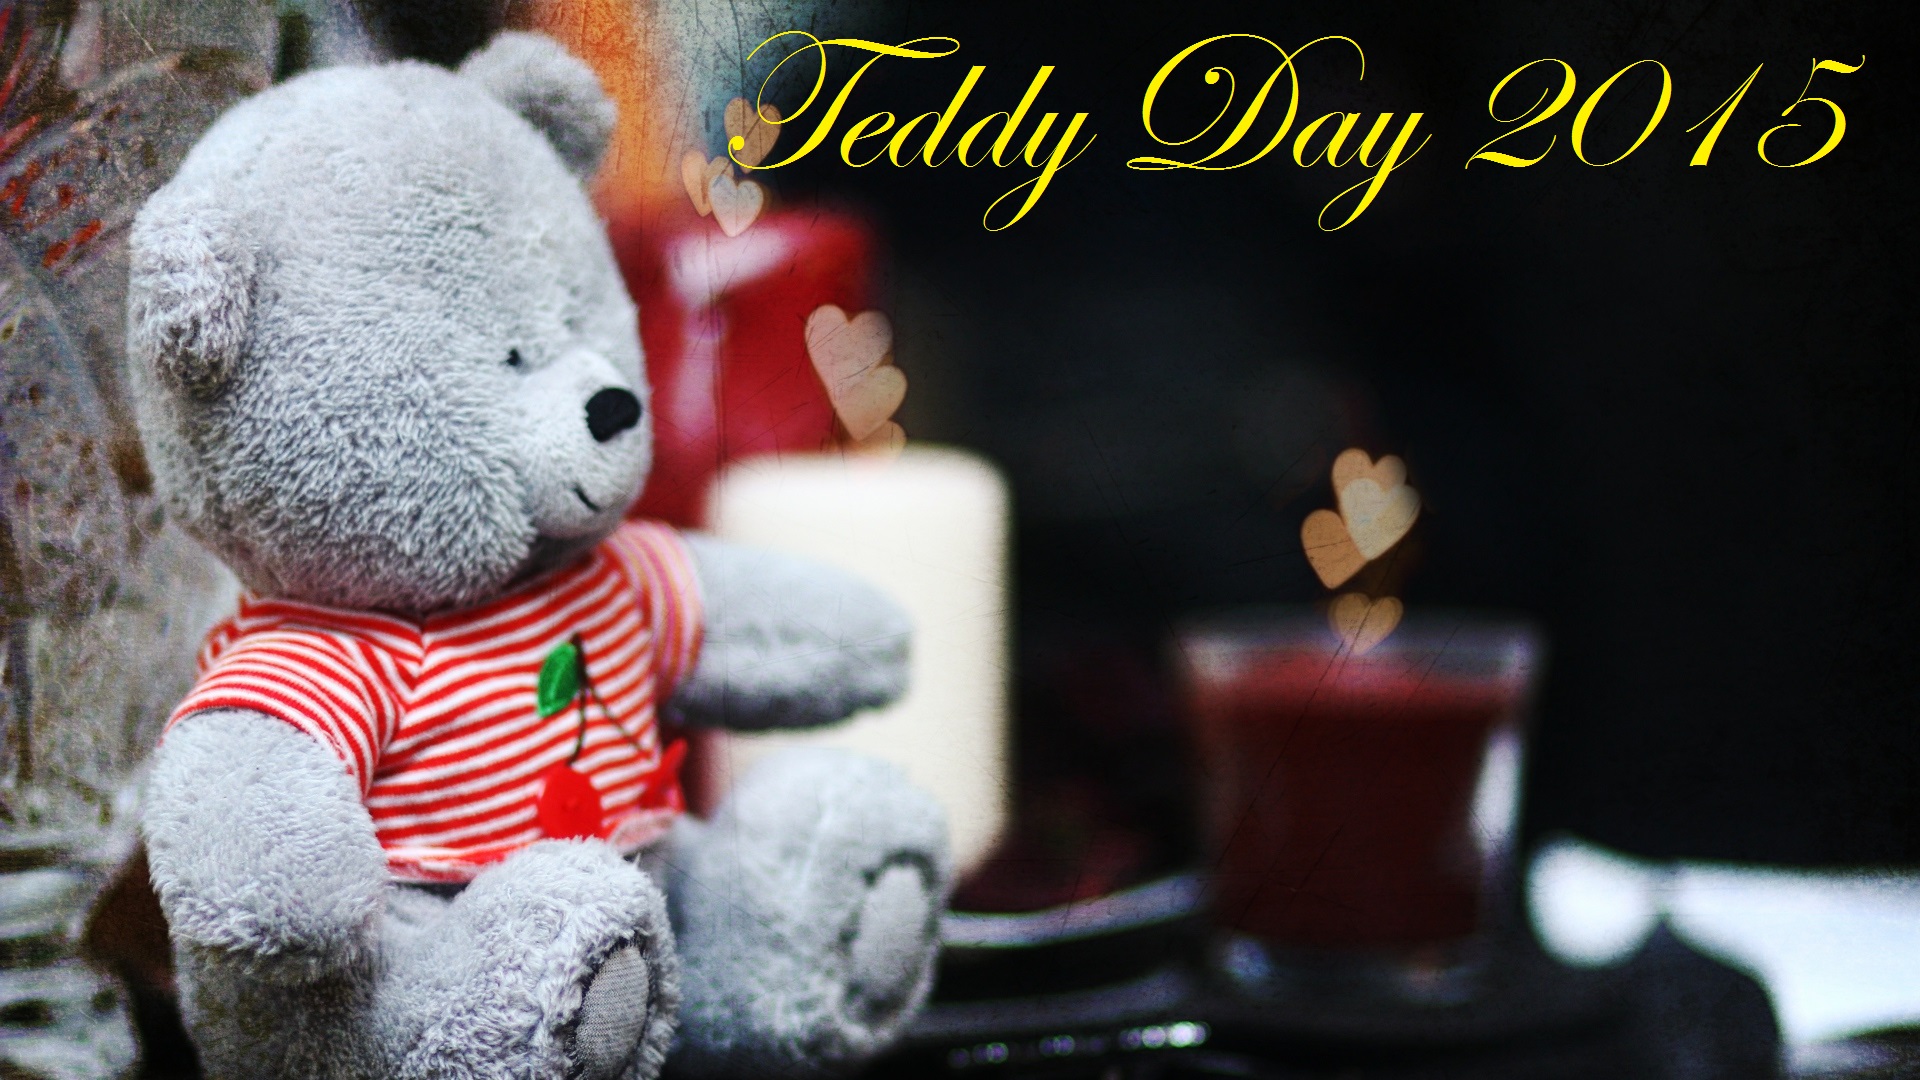 Happy Teddy Day Cute Teddy Bear Images HD Wallpapers for Facebook Covers Whatsapp DP